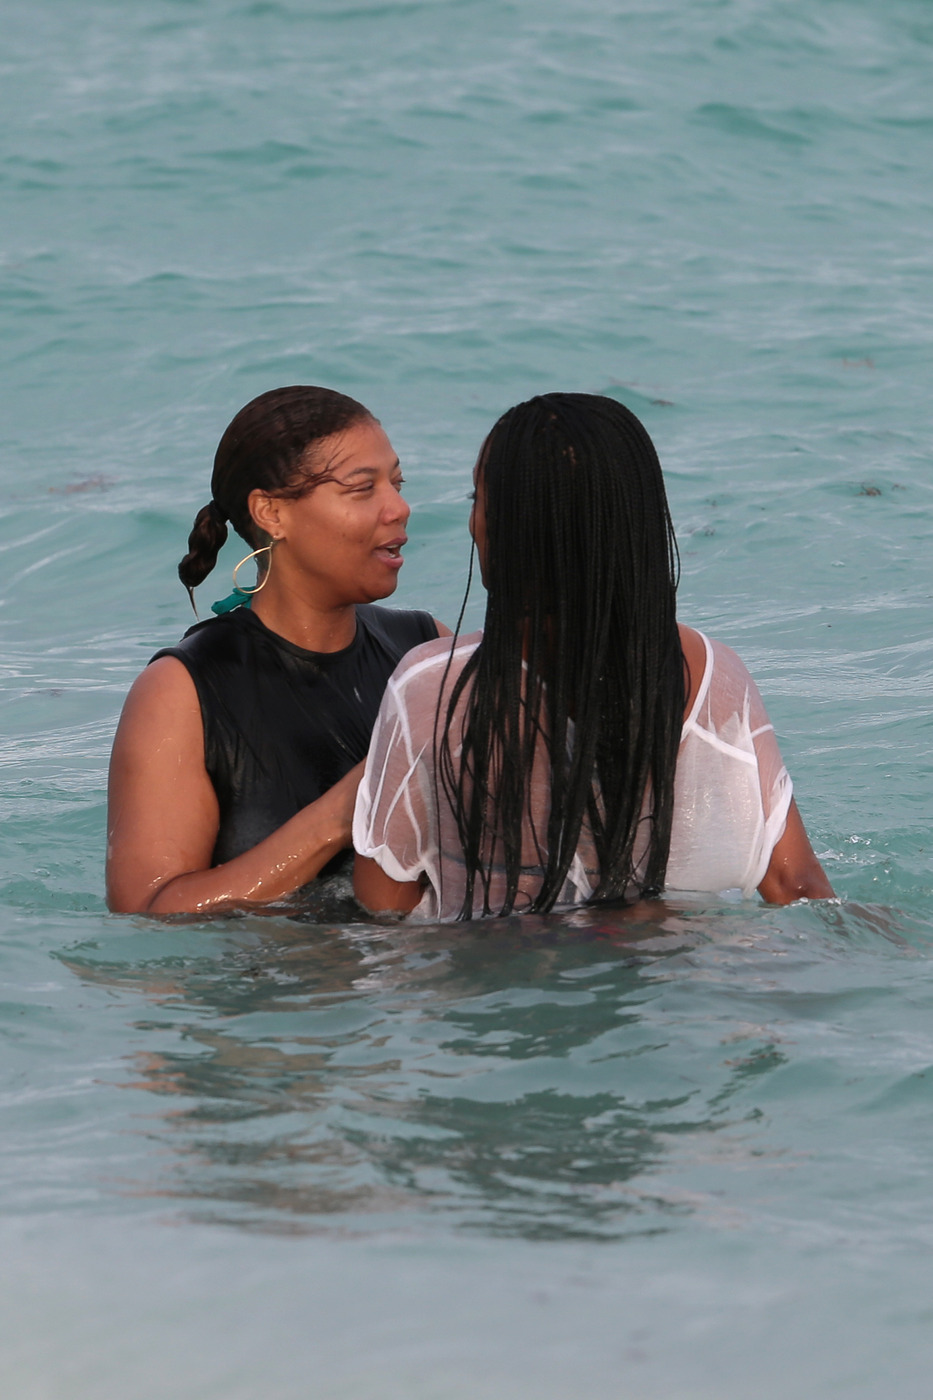 Queen Latifah enjoys a day at the beach with her friends in Miami